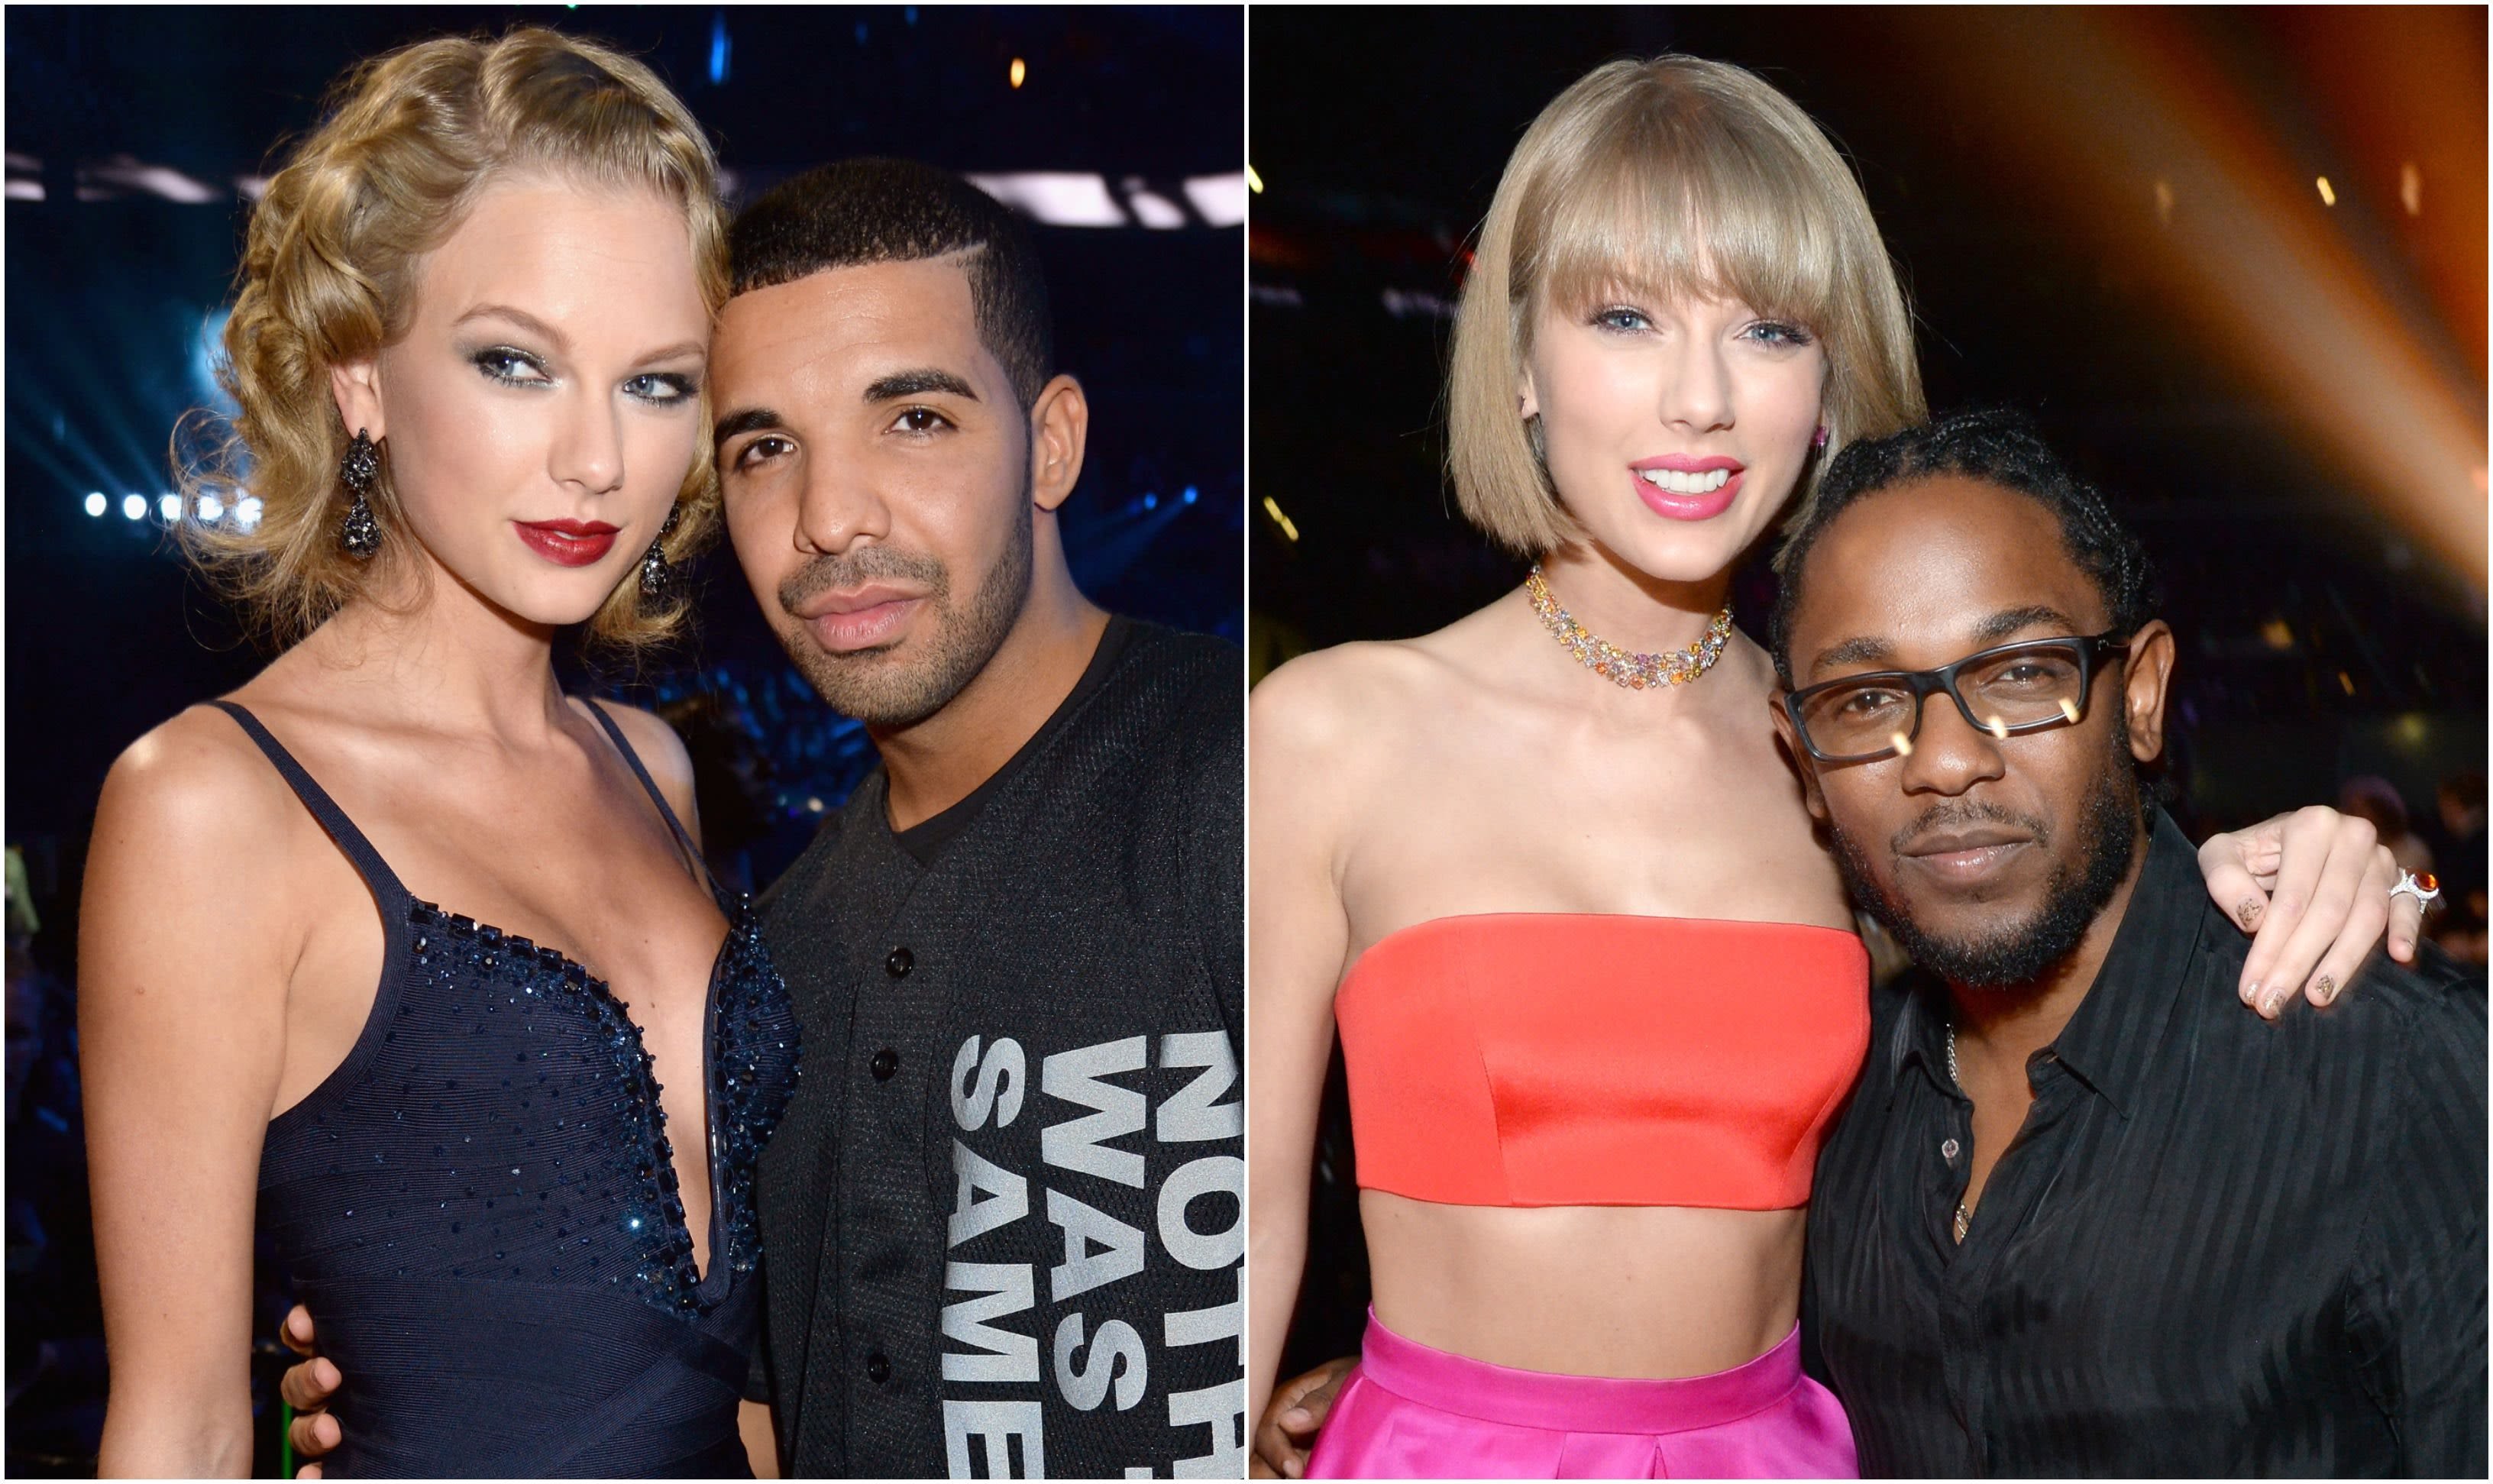 Here’s How Taylor Swift Got Dragged Into Drake’s Heated Rap Feud With Kendrick Lamar